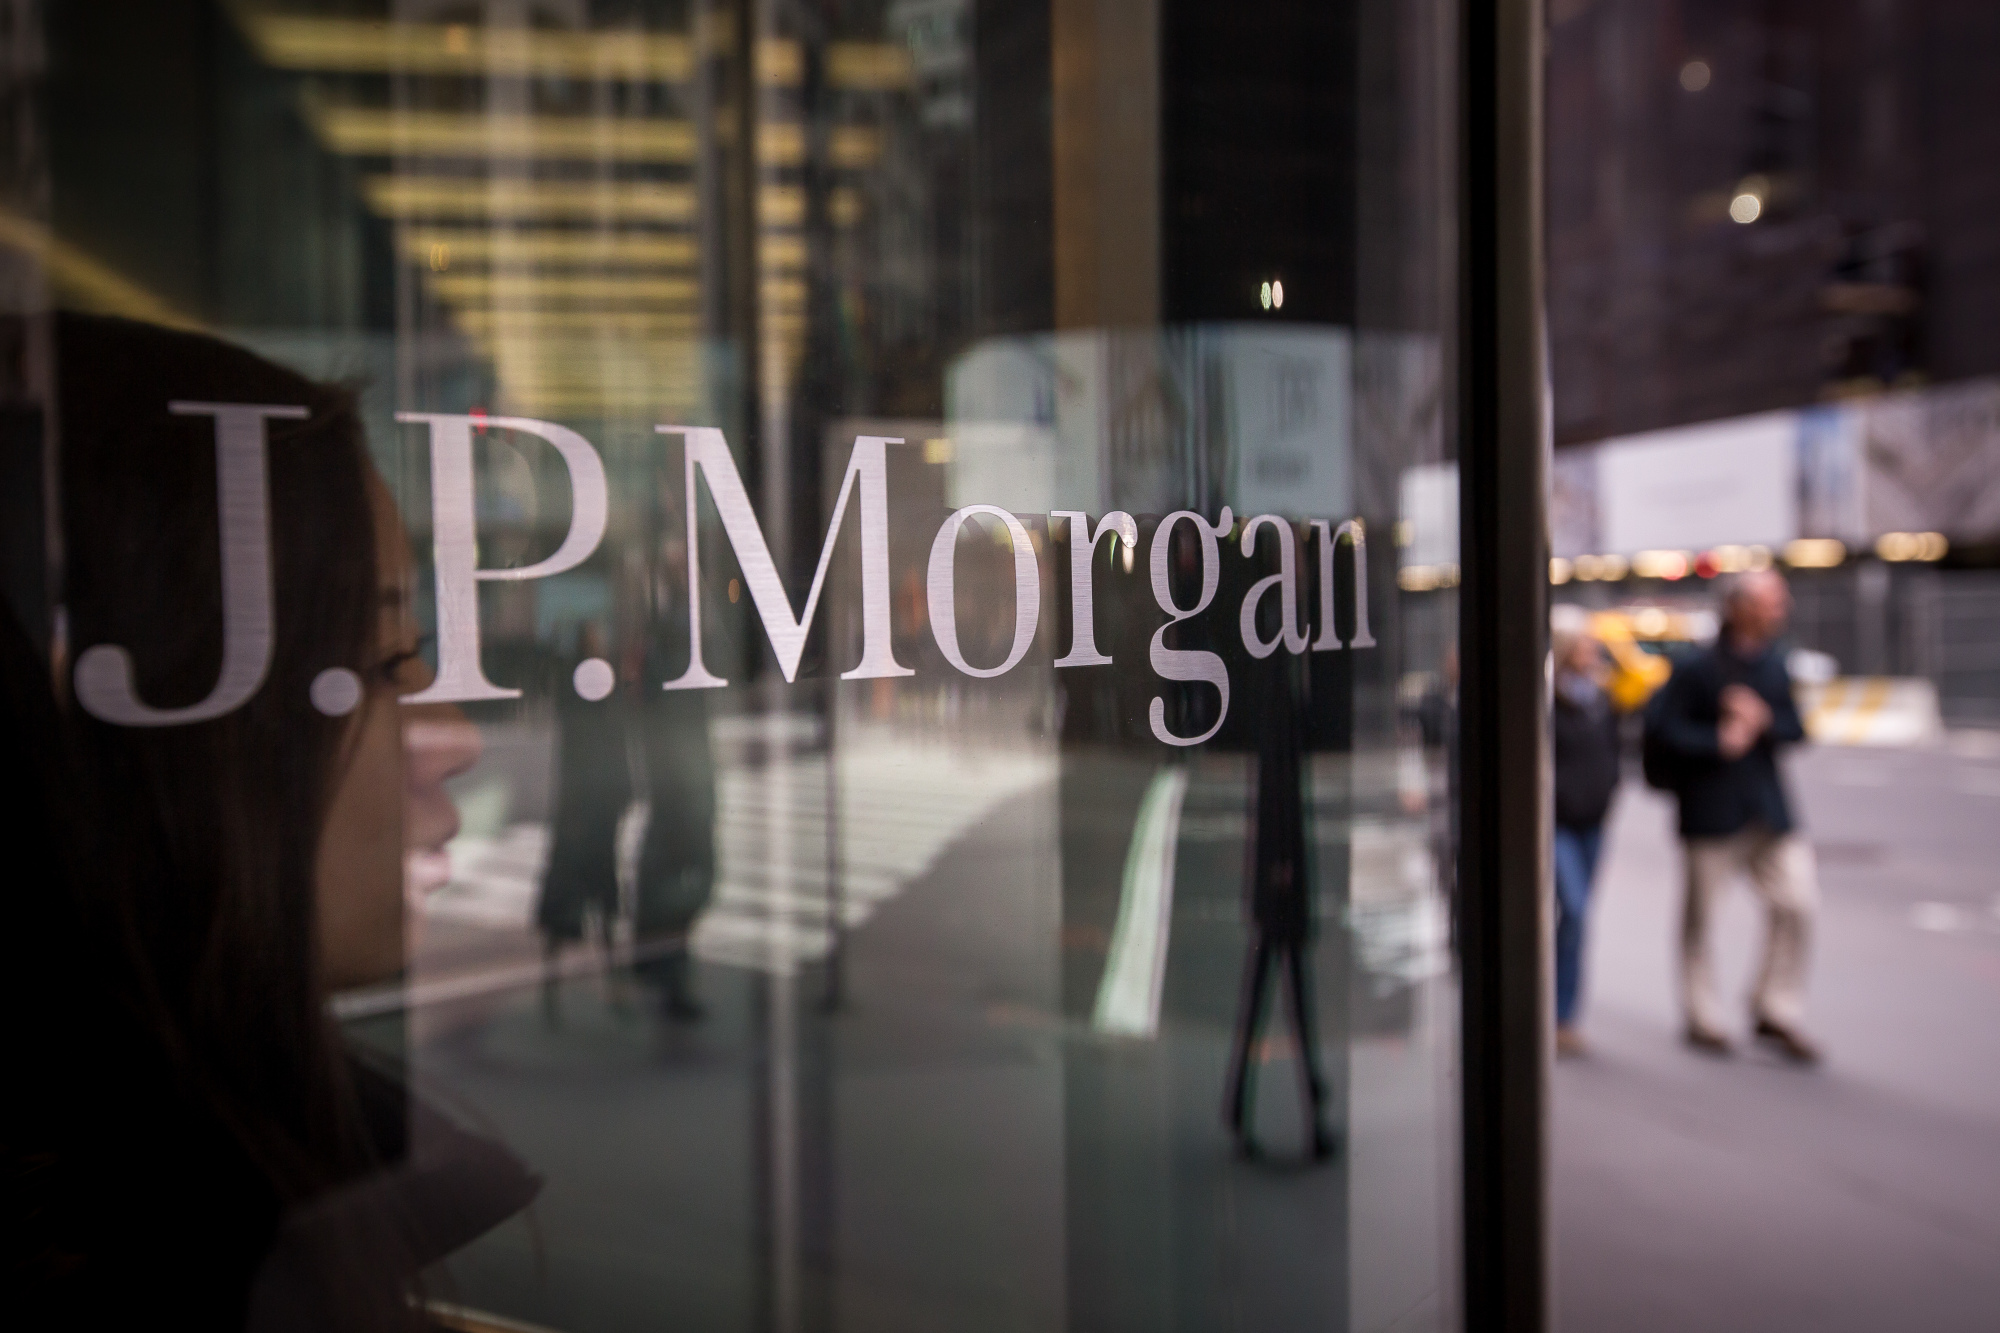 JPMorgan Chase & Co. signage is displayed at its Madison Avenue building in New York.